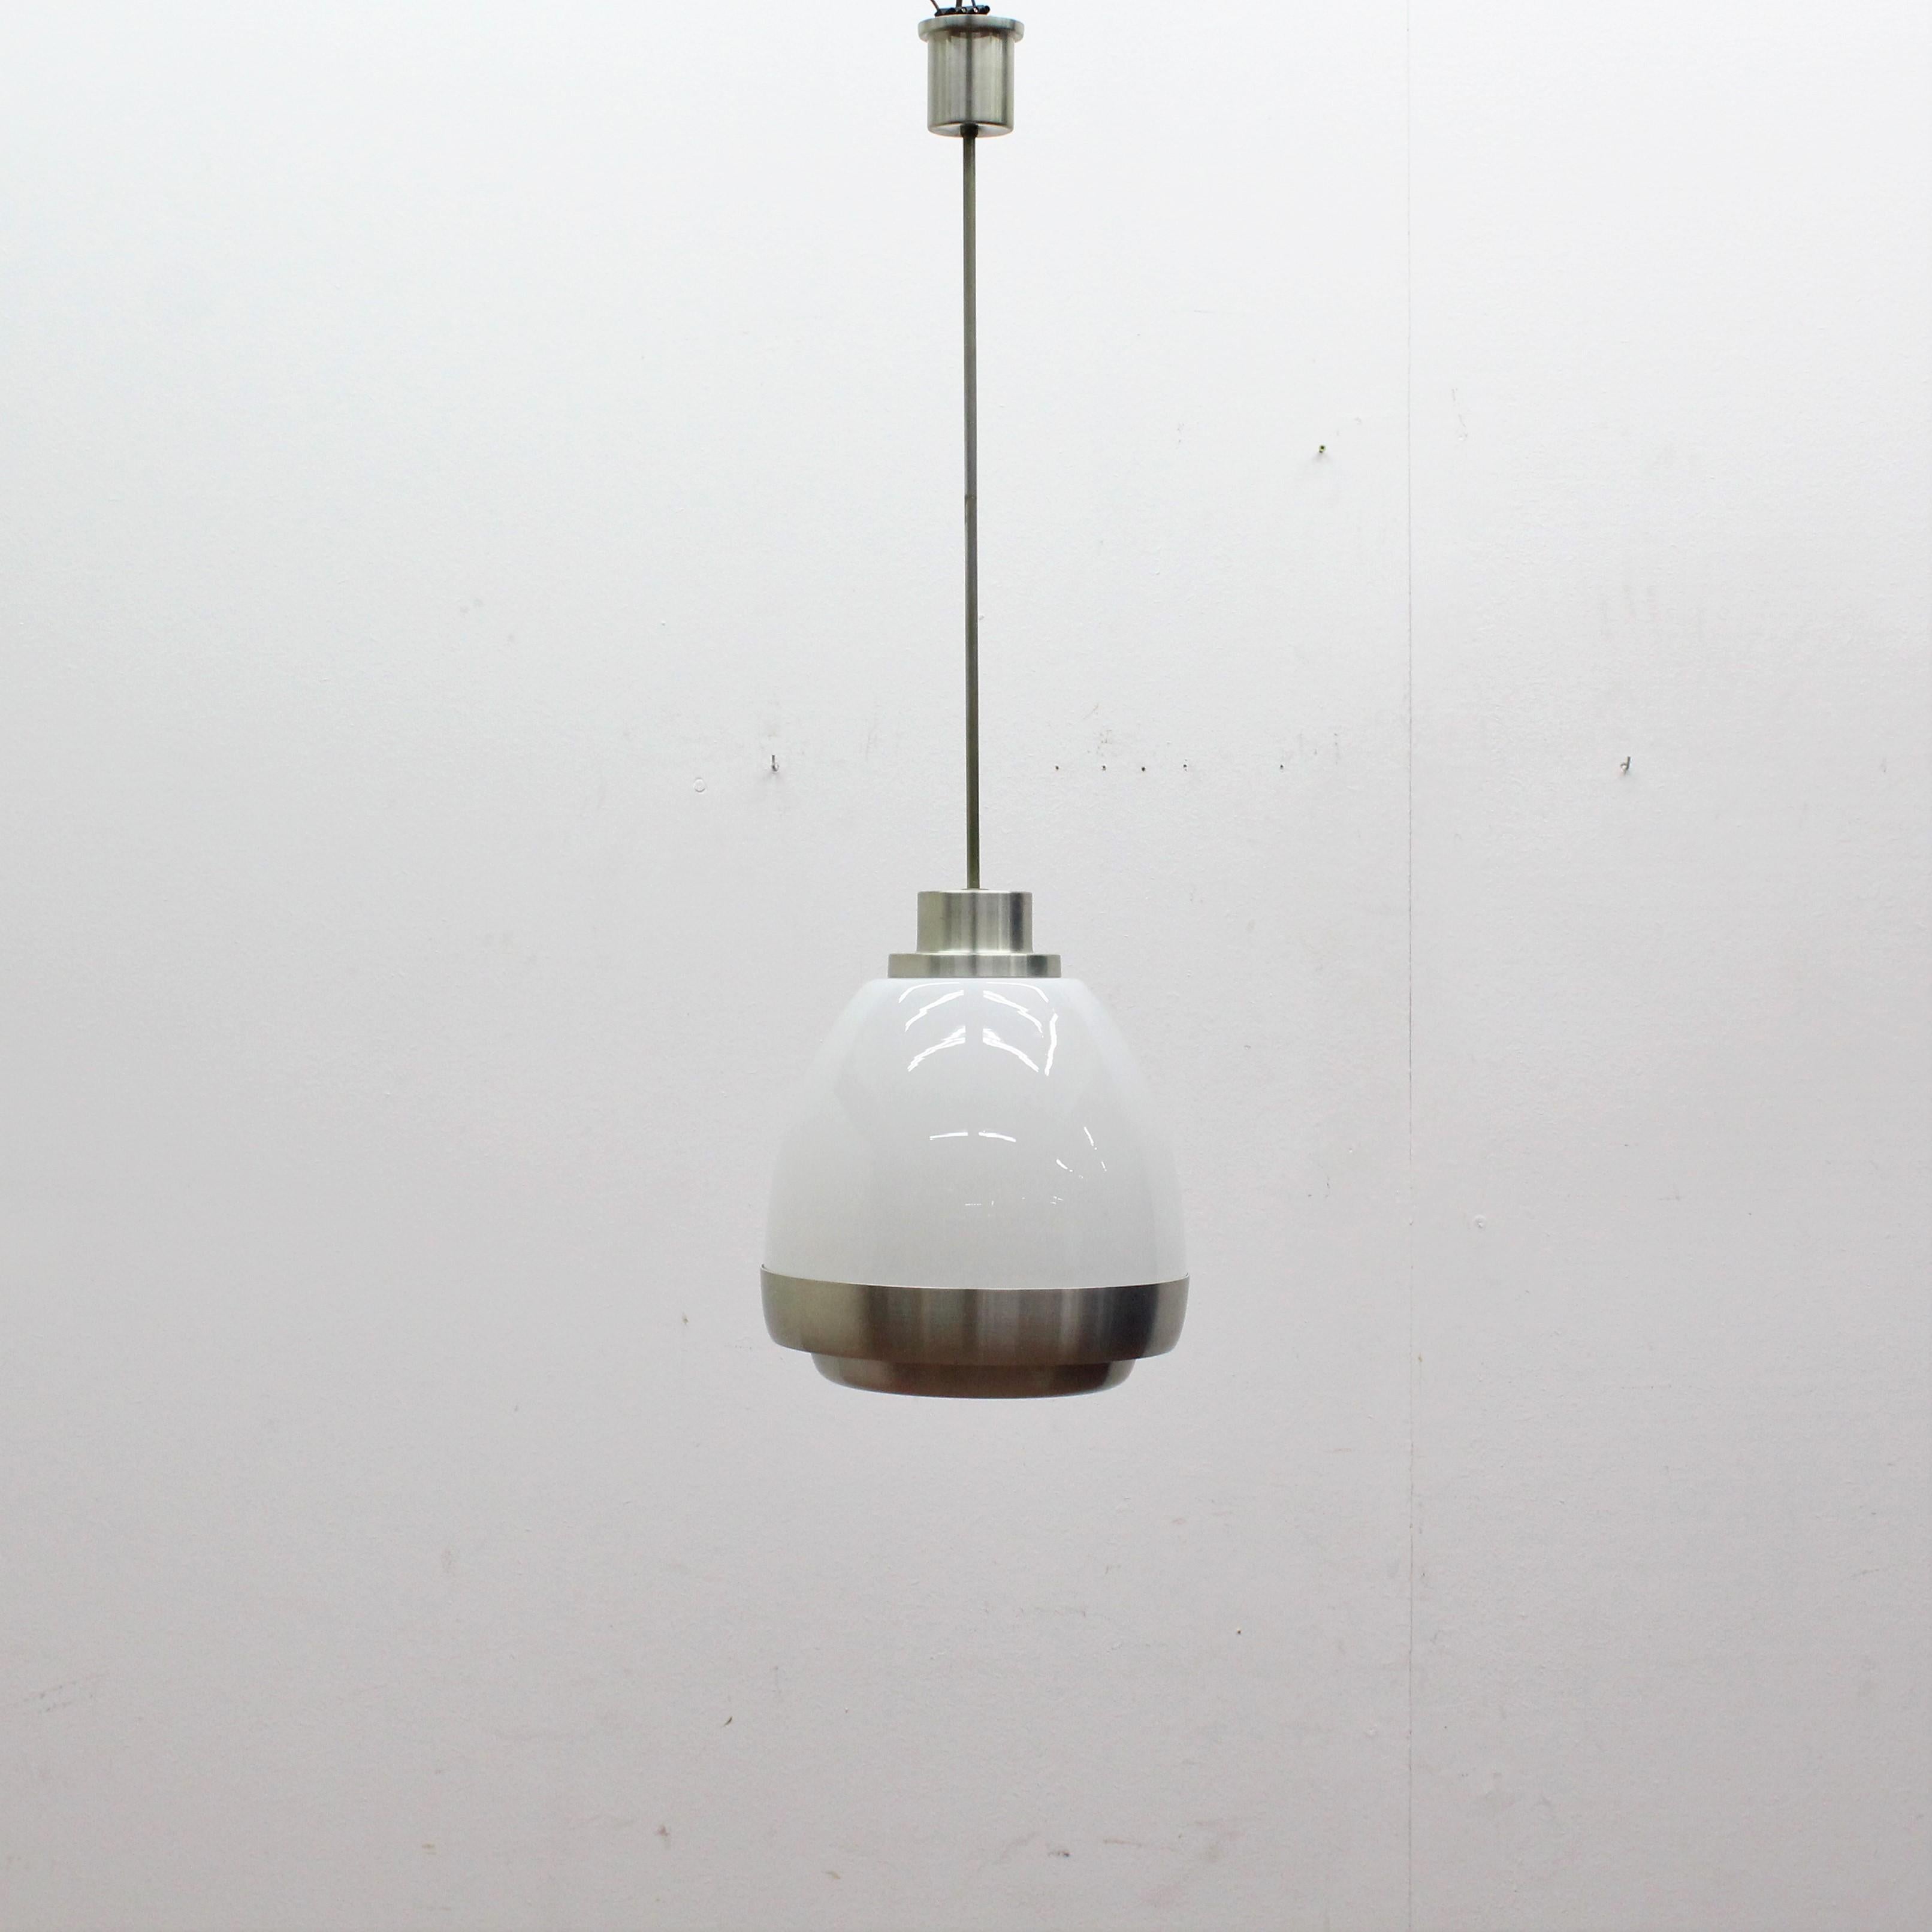 Aluminum Midcentury Pendant Glass and Metal Lamp by Pia Guidetti Crippa for Lumi, 1960s